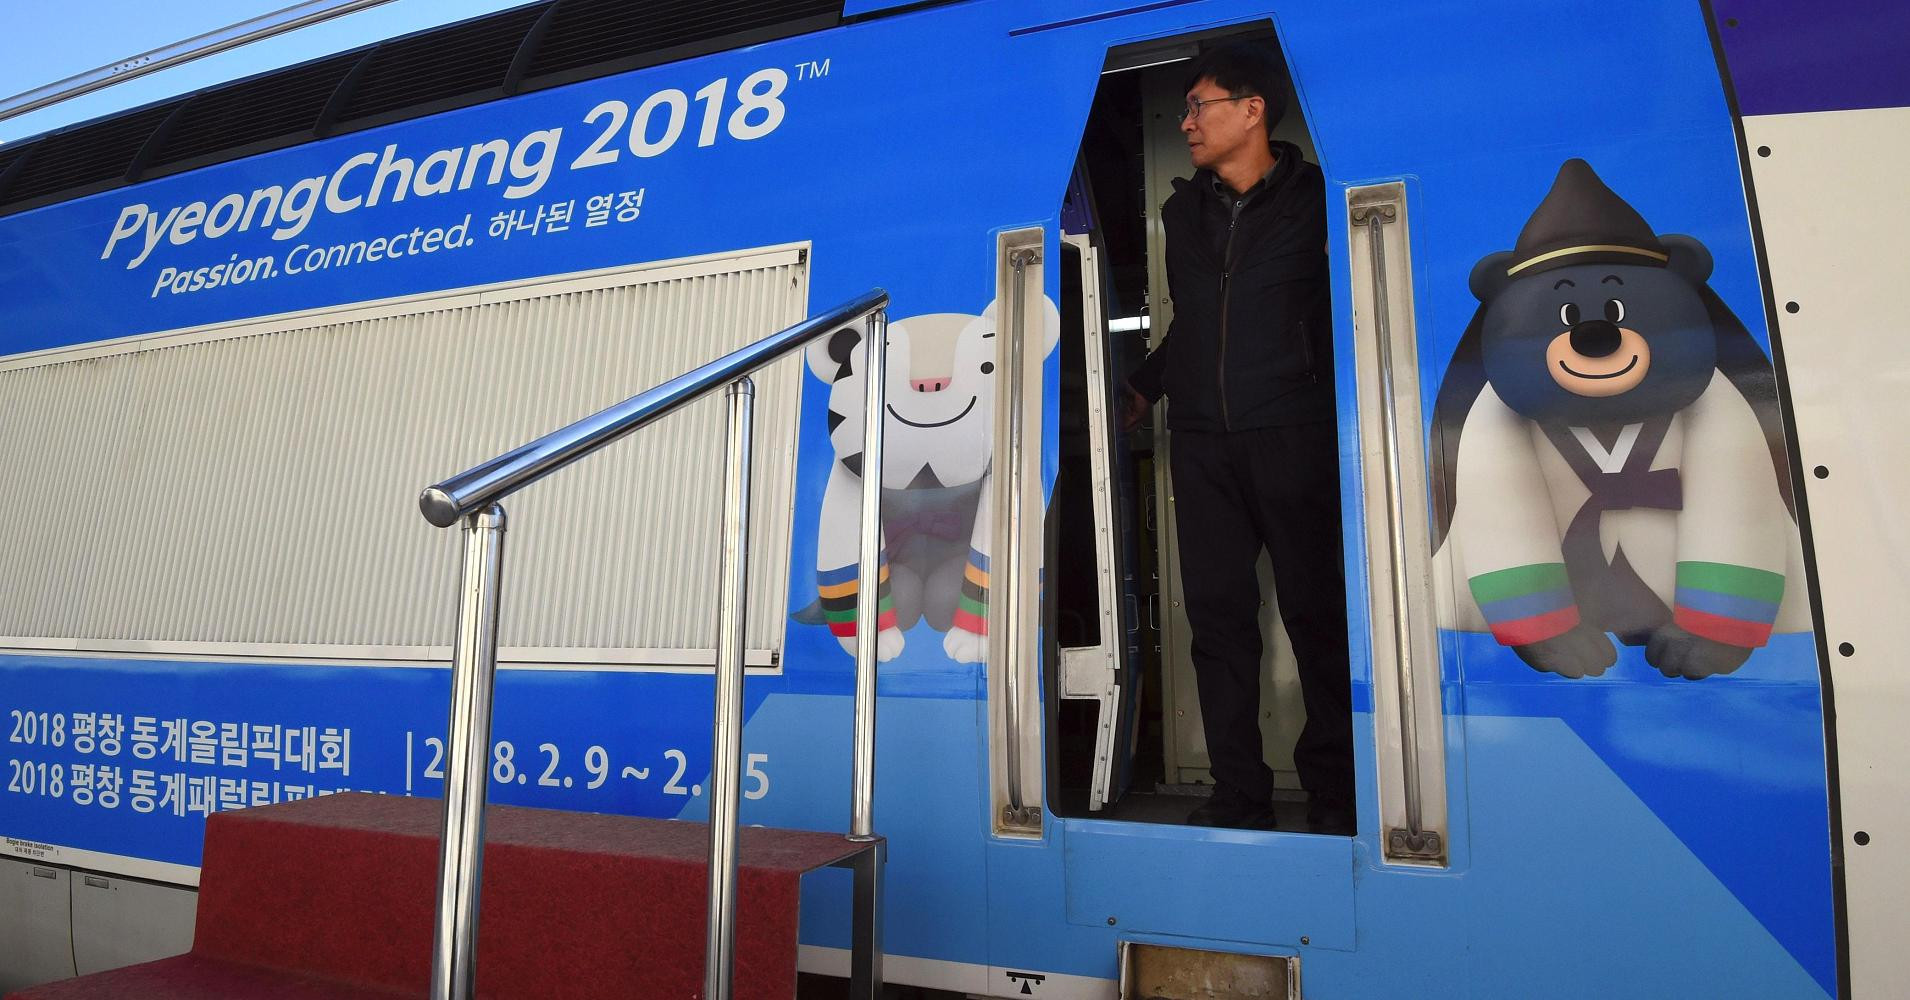 High-speed train for Pyeongchang 2018 set to make first public journey